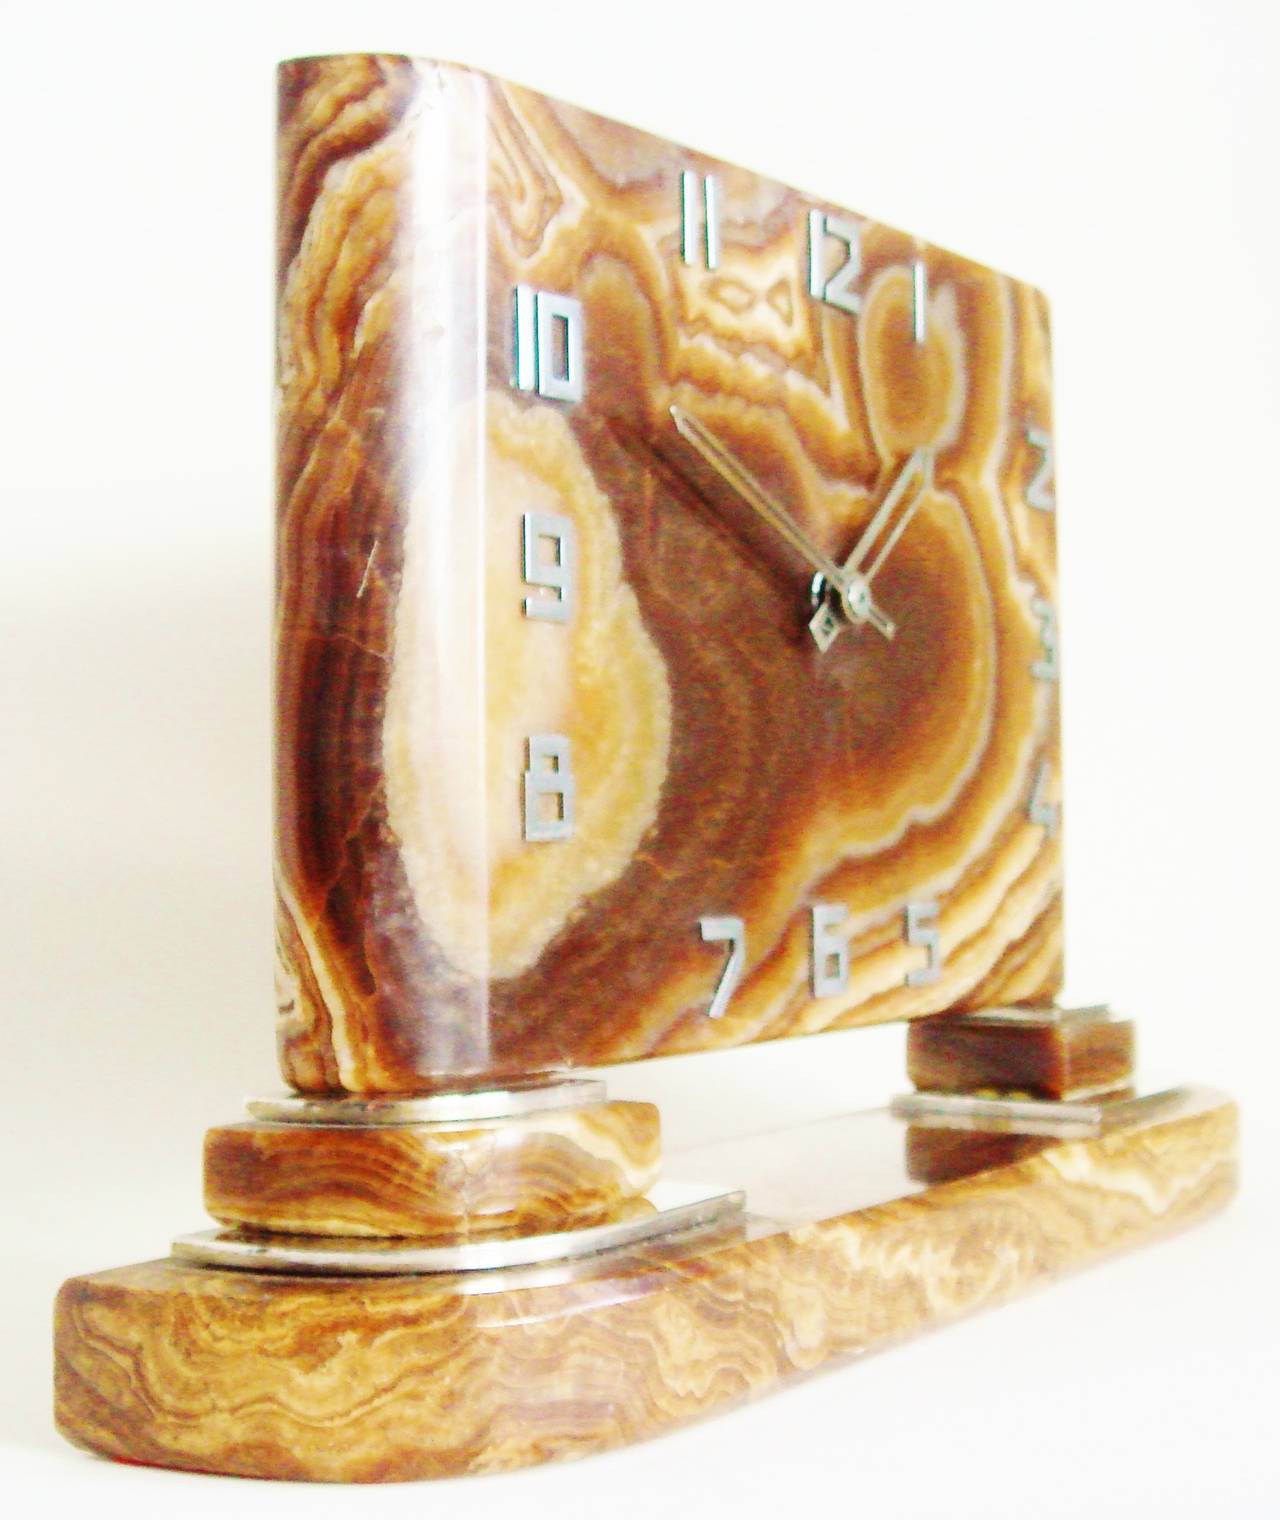 Large French Art Deco Gold Onyx and Nickel-Plated Metal Mechanical Mantel Clock 2